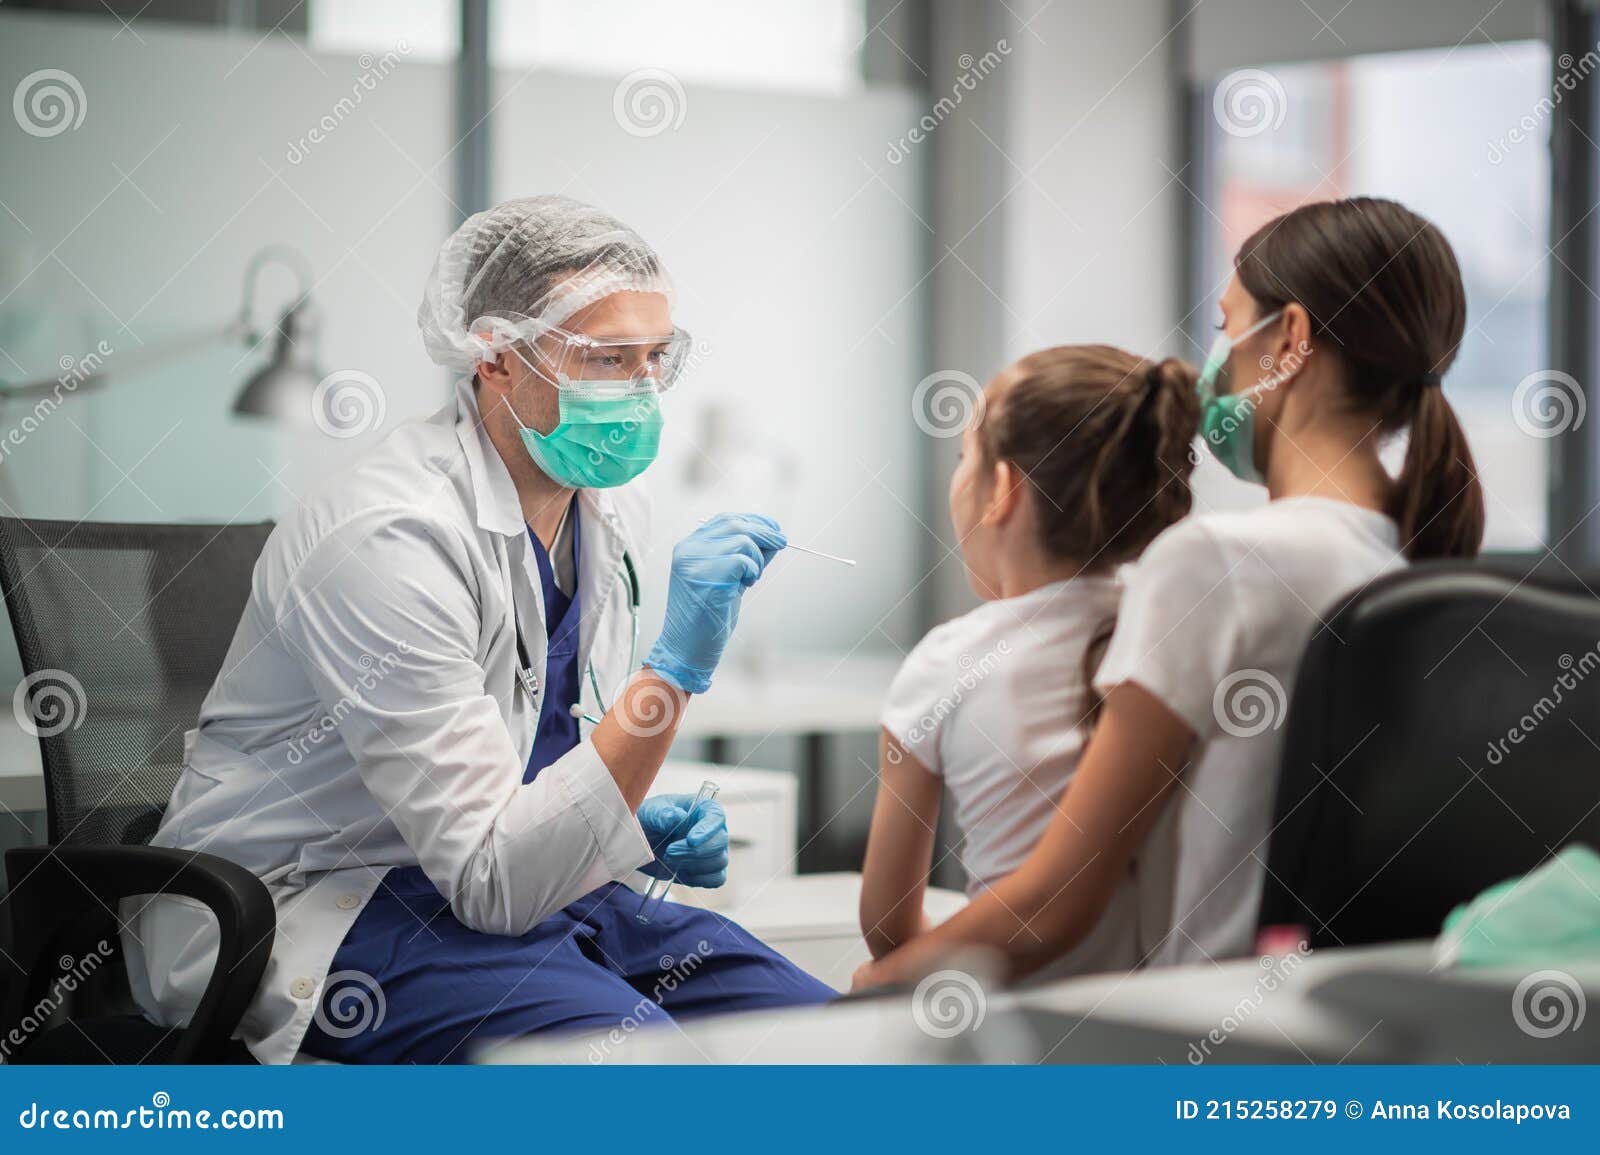 a young doctor conducts an analysis for coronavirus in the laboratory of a girl, takes a smear from the nasopharynx